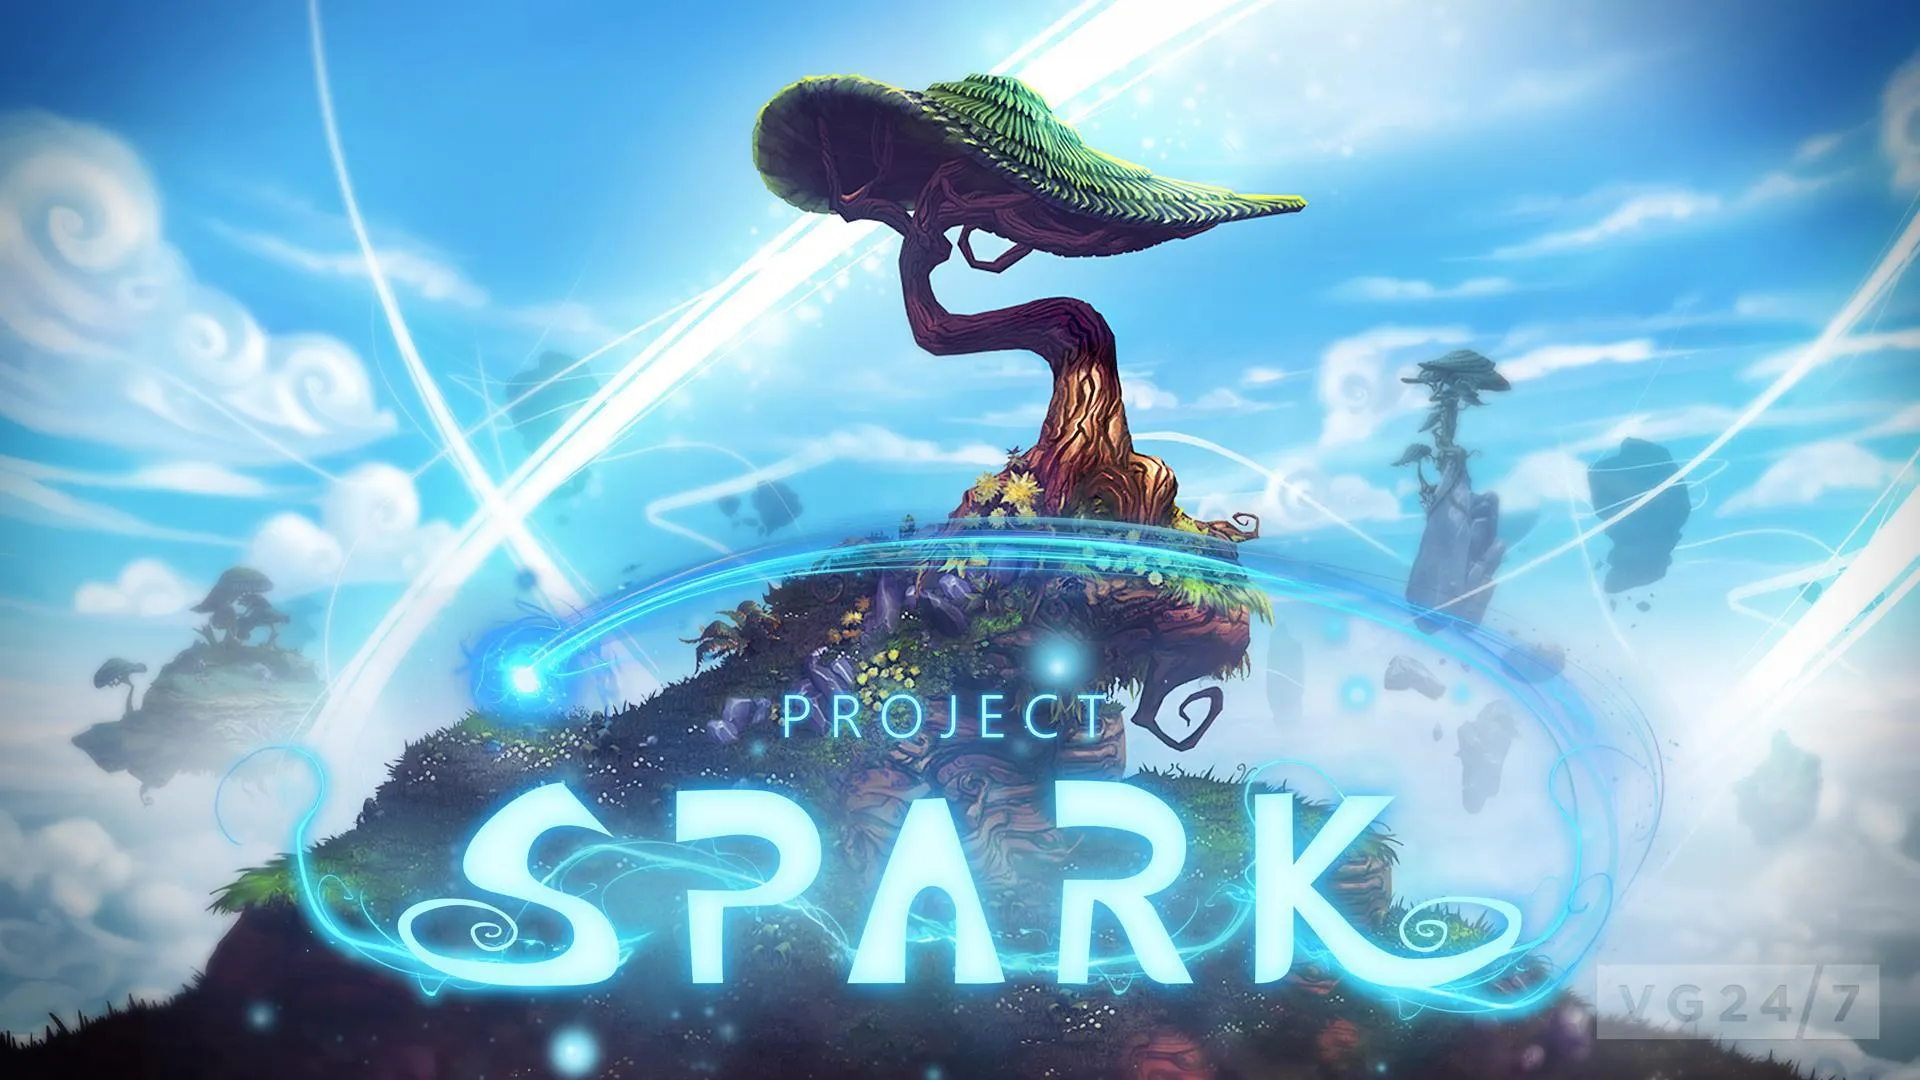 7 project spark 2541